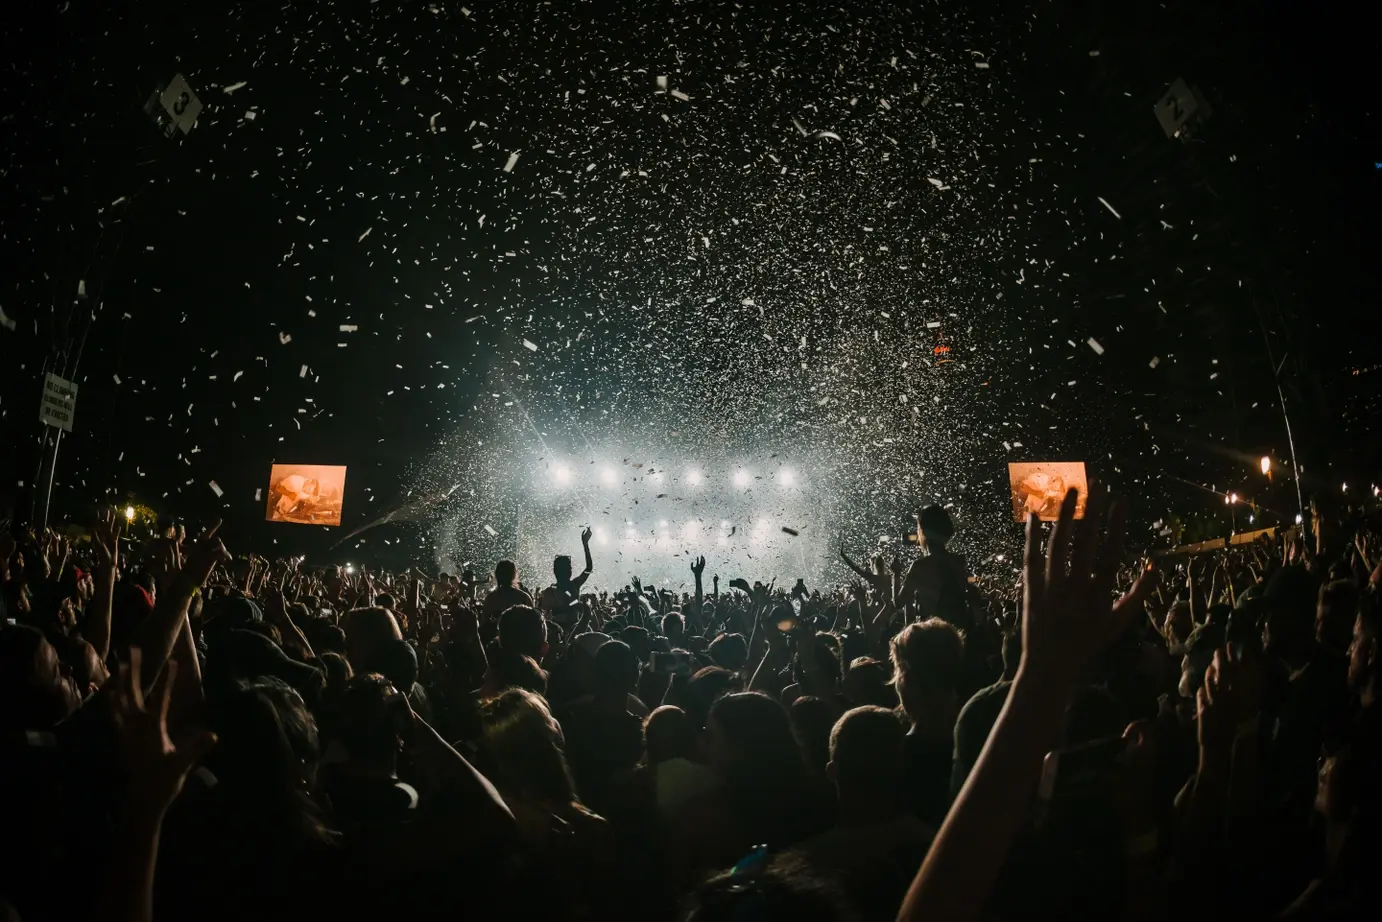 Cinemagraphic photo of a large group of people enjoying a rock concert with concert lights beaming down. Image by Danny Howe on Unsplash.